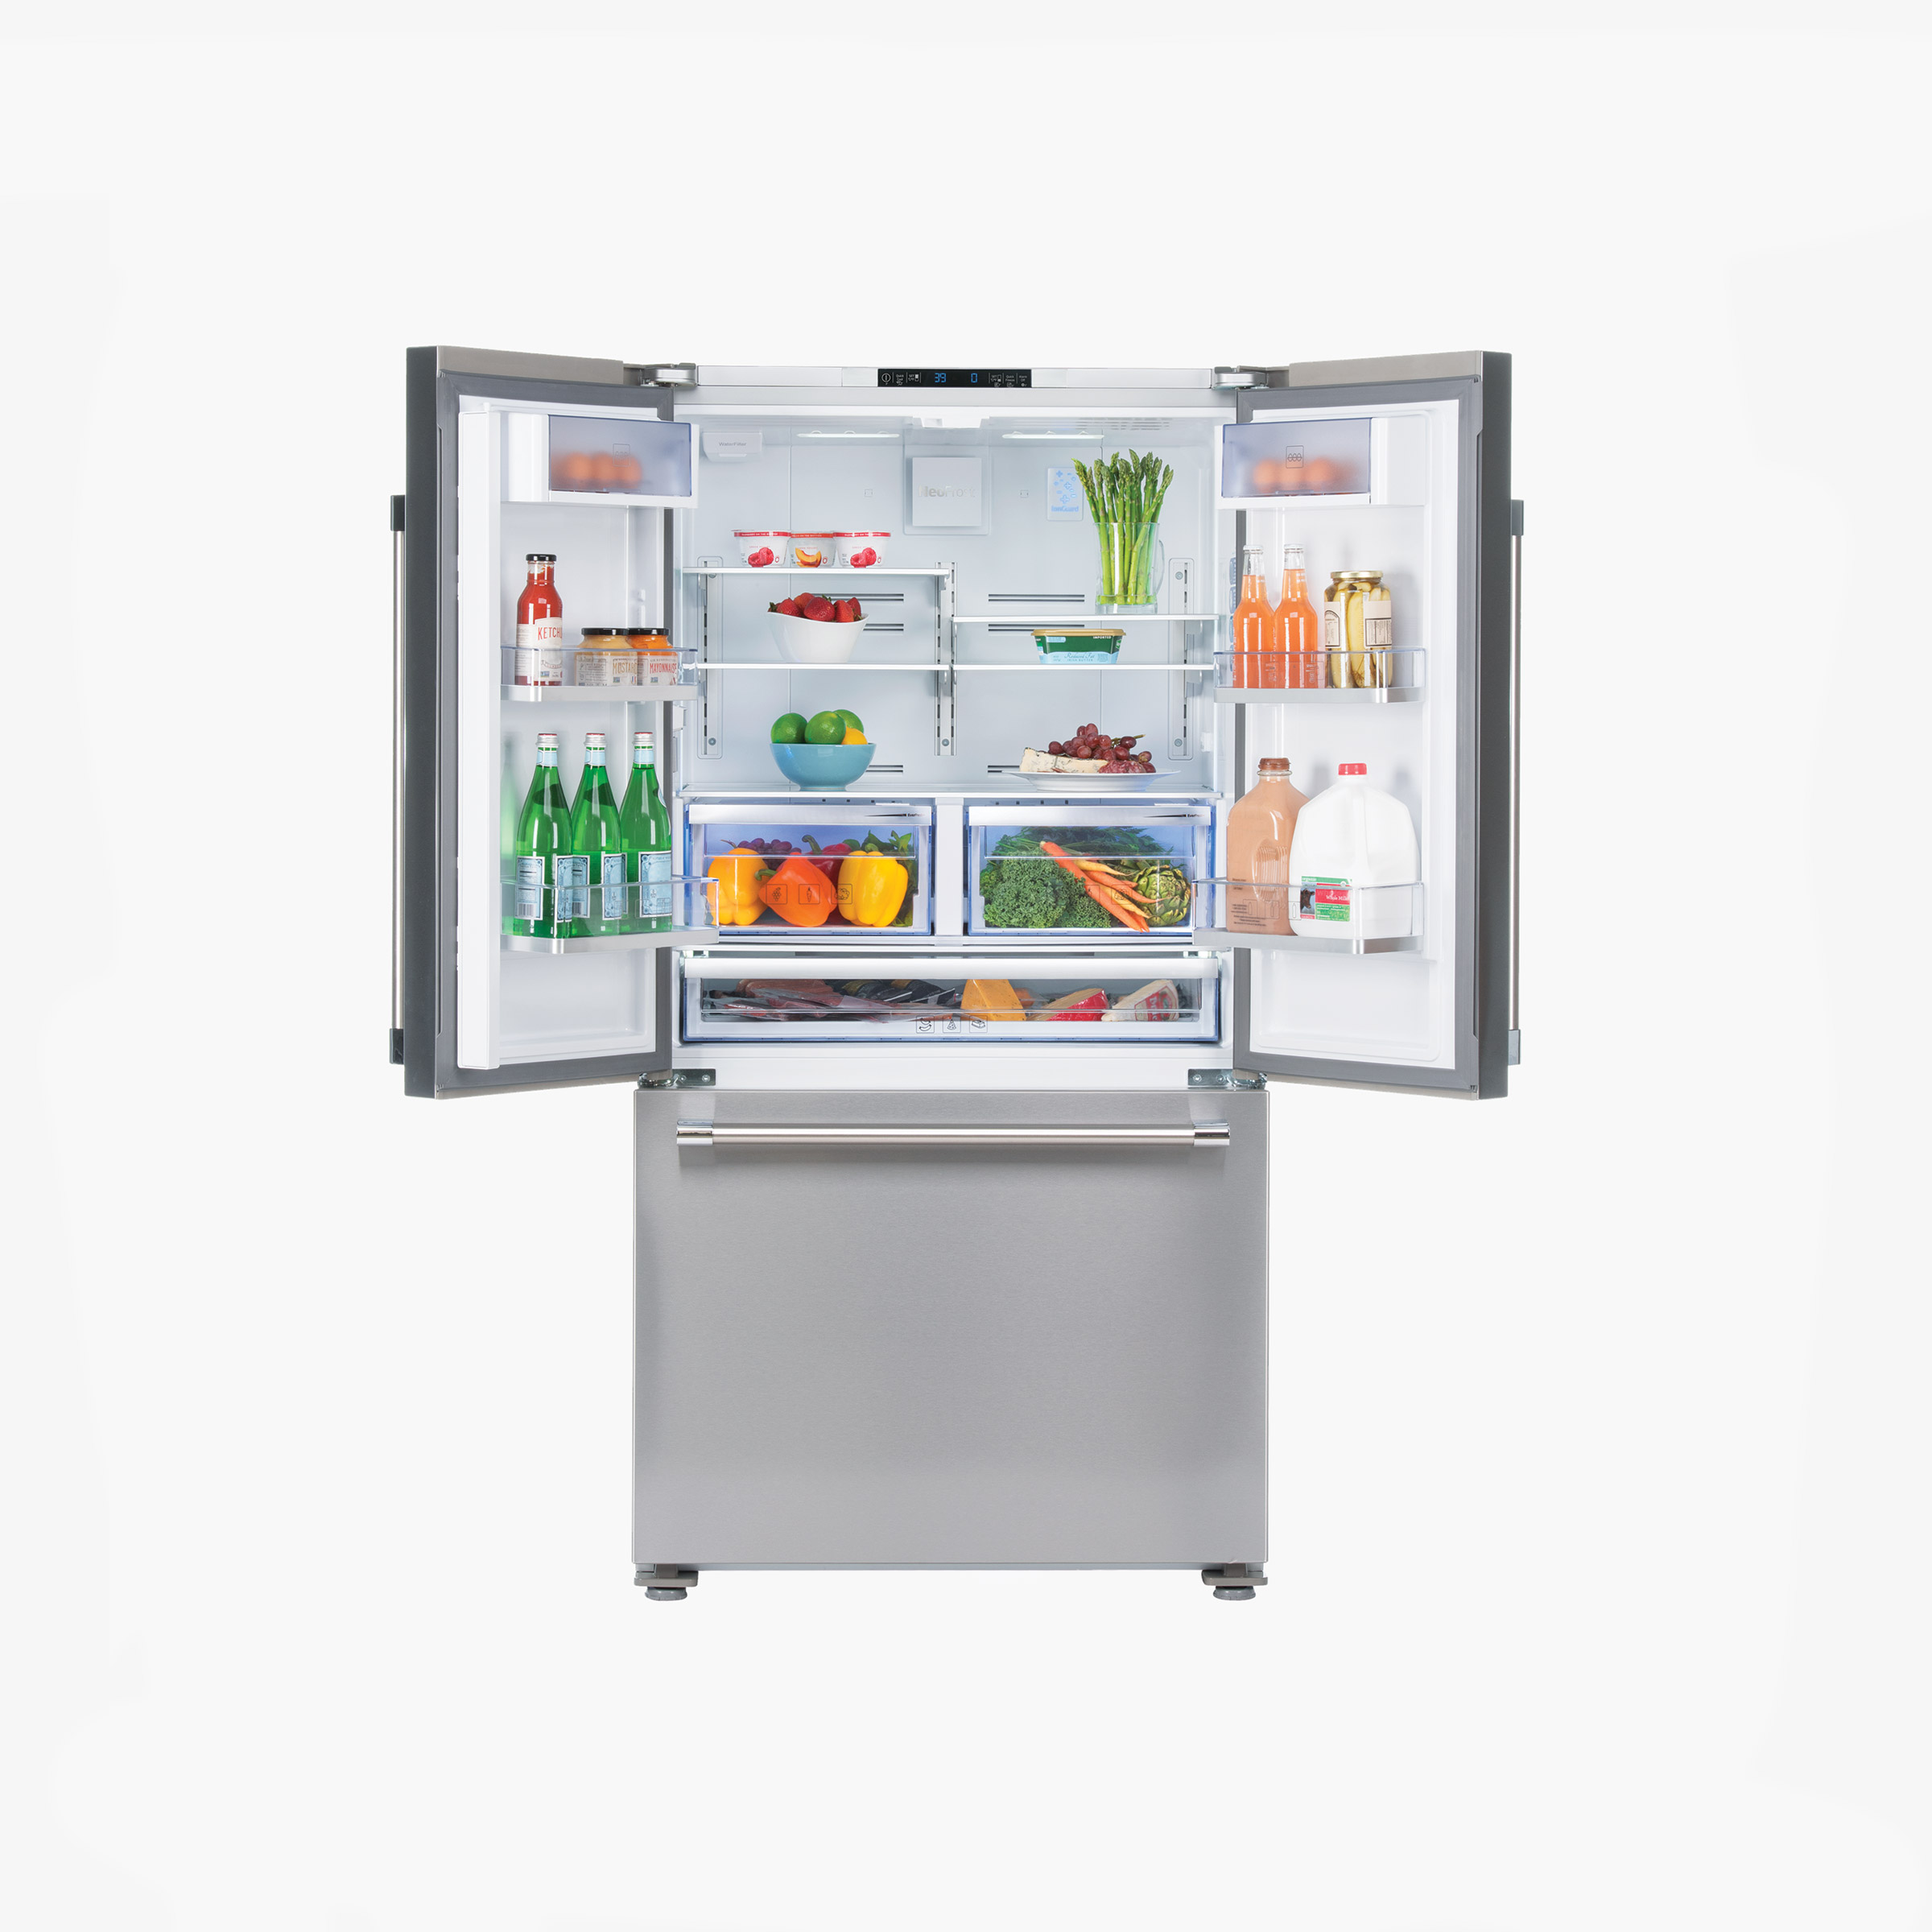 open stainless steel fridge filled with food